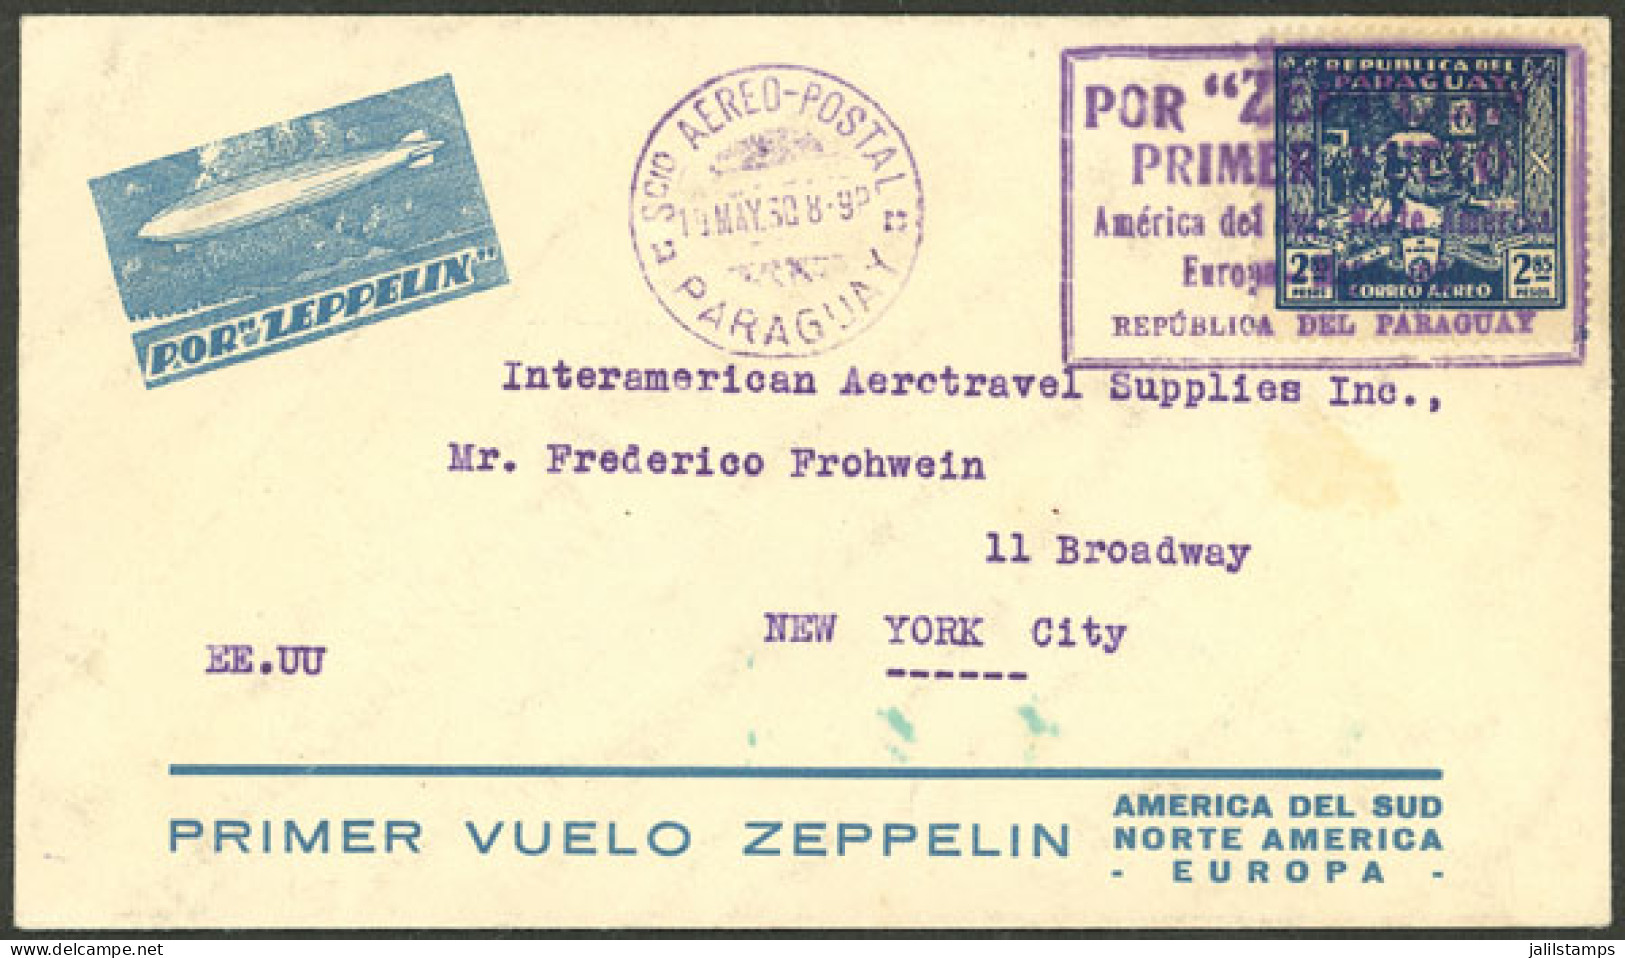 PARAGUAY: 19/MAY/1930 Asunción - USA, Airmail Cover Carried On The "First Zeppelin Flight Between South America And Norh - Paraguay